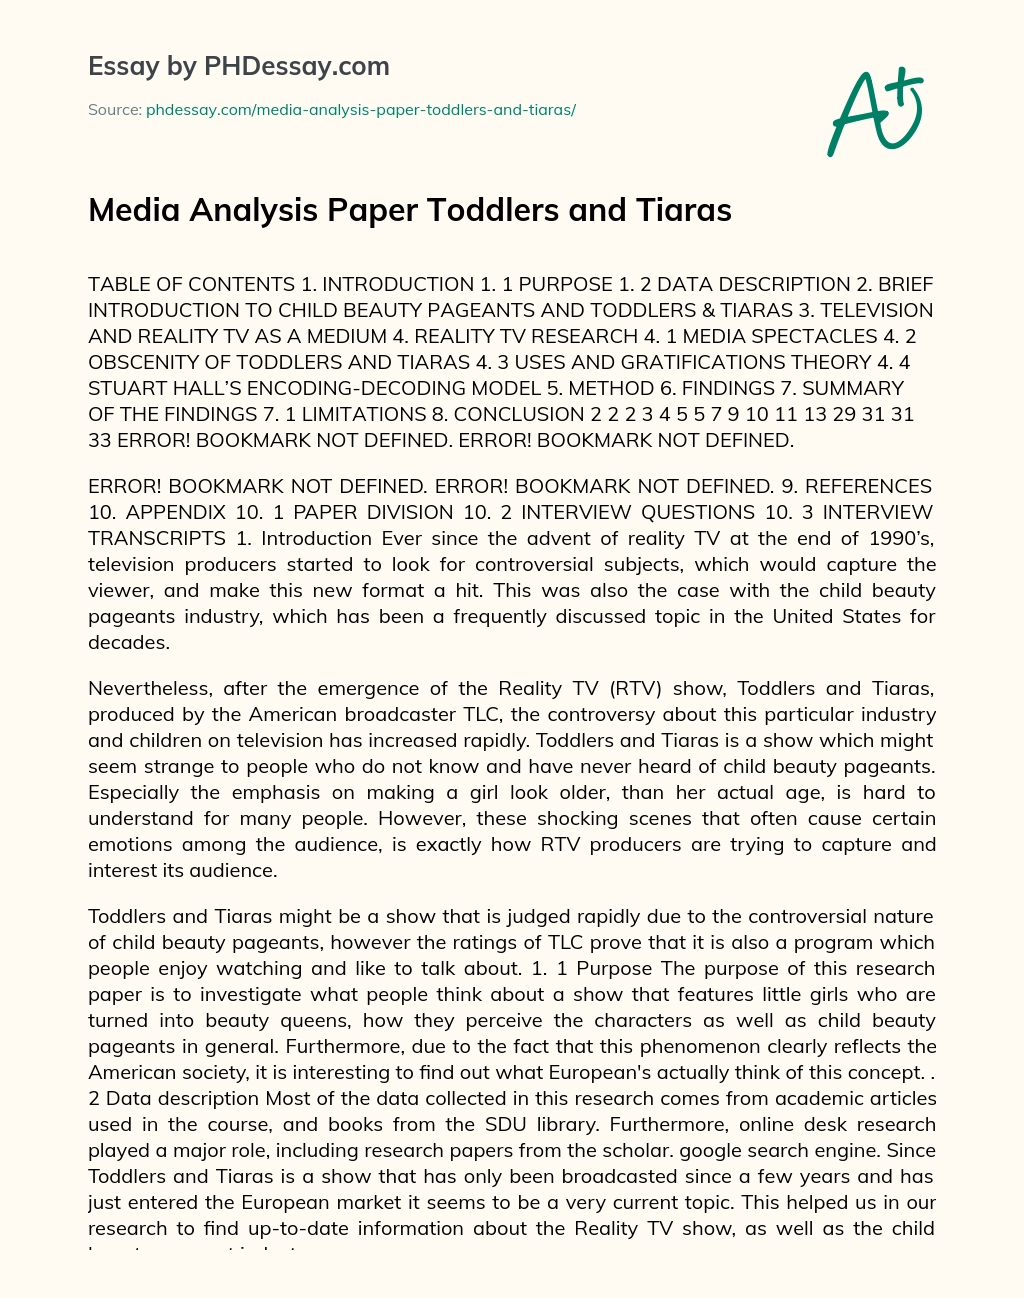 Media Analysis Paper Toddlers and Tiaras essay